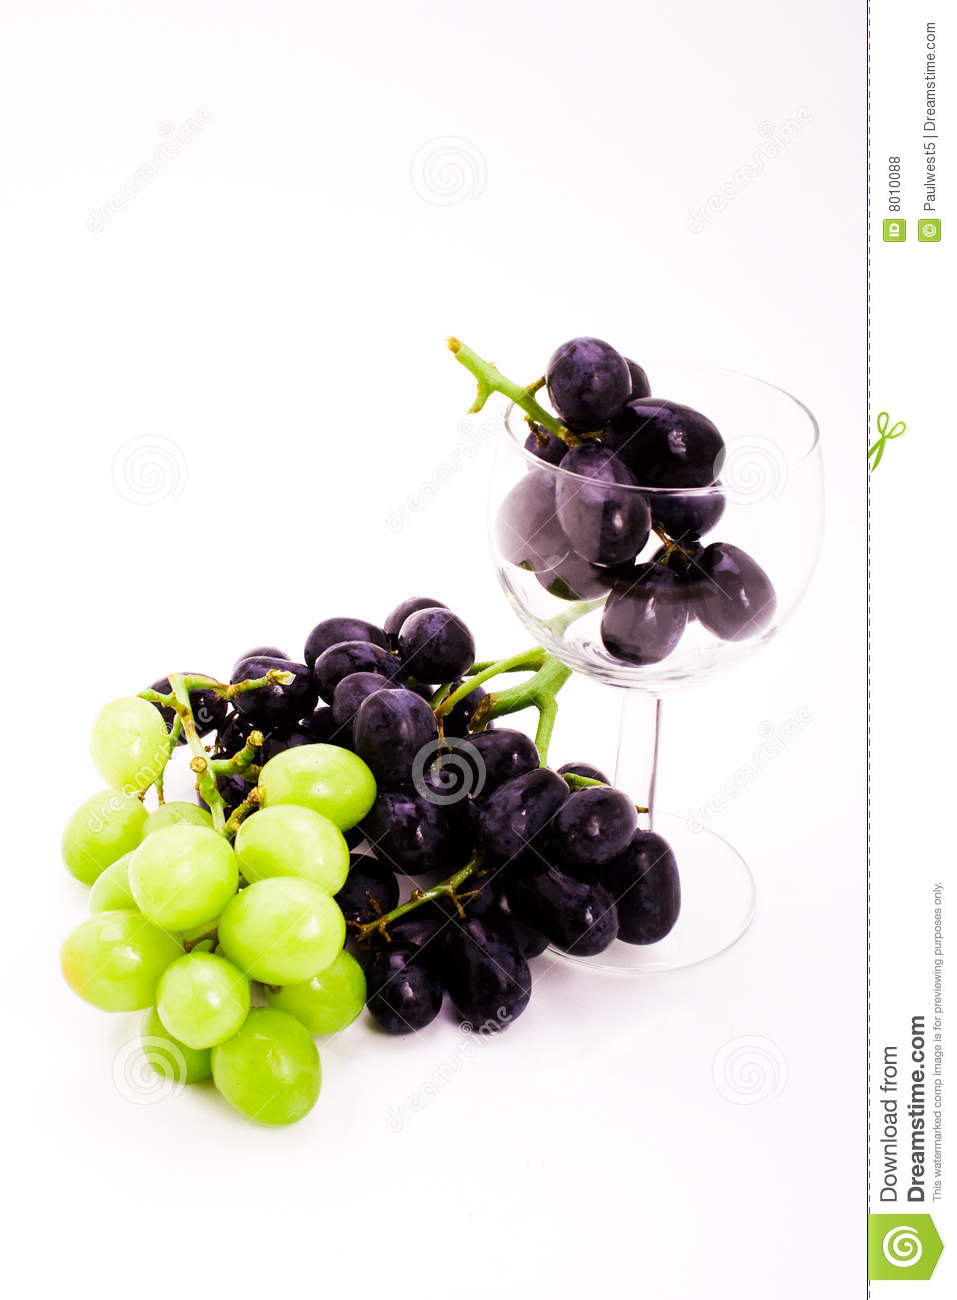 Wine Glass With Grapes Royalty Free Stock Photos   Image  8010088